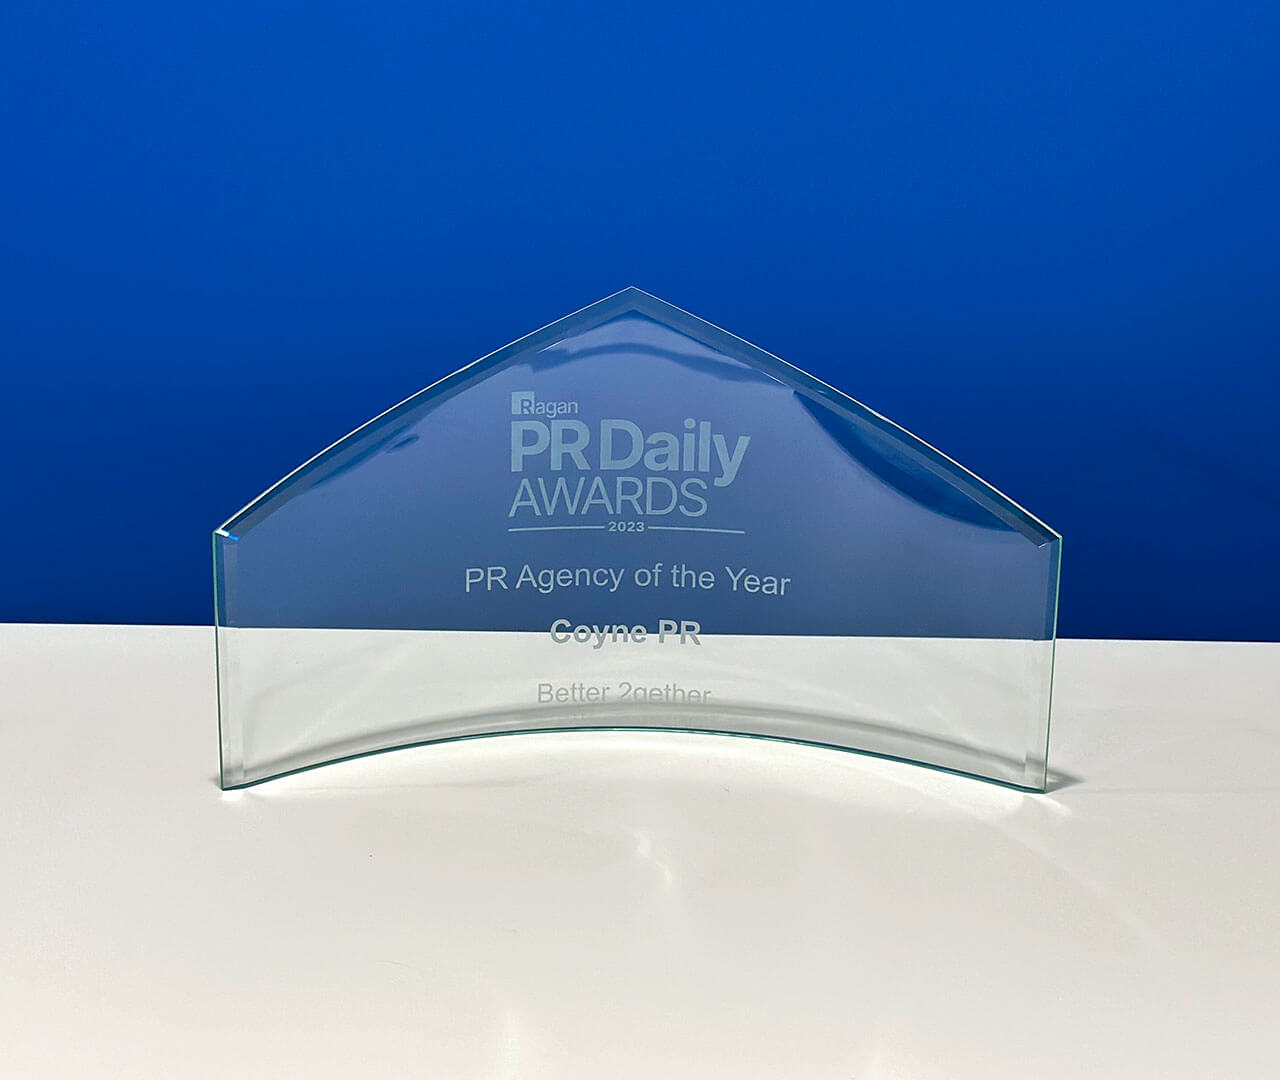 Coyne Public Relations Celebrates Victory as PR Agency of the Year at Ragan's PR Daily Awards